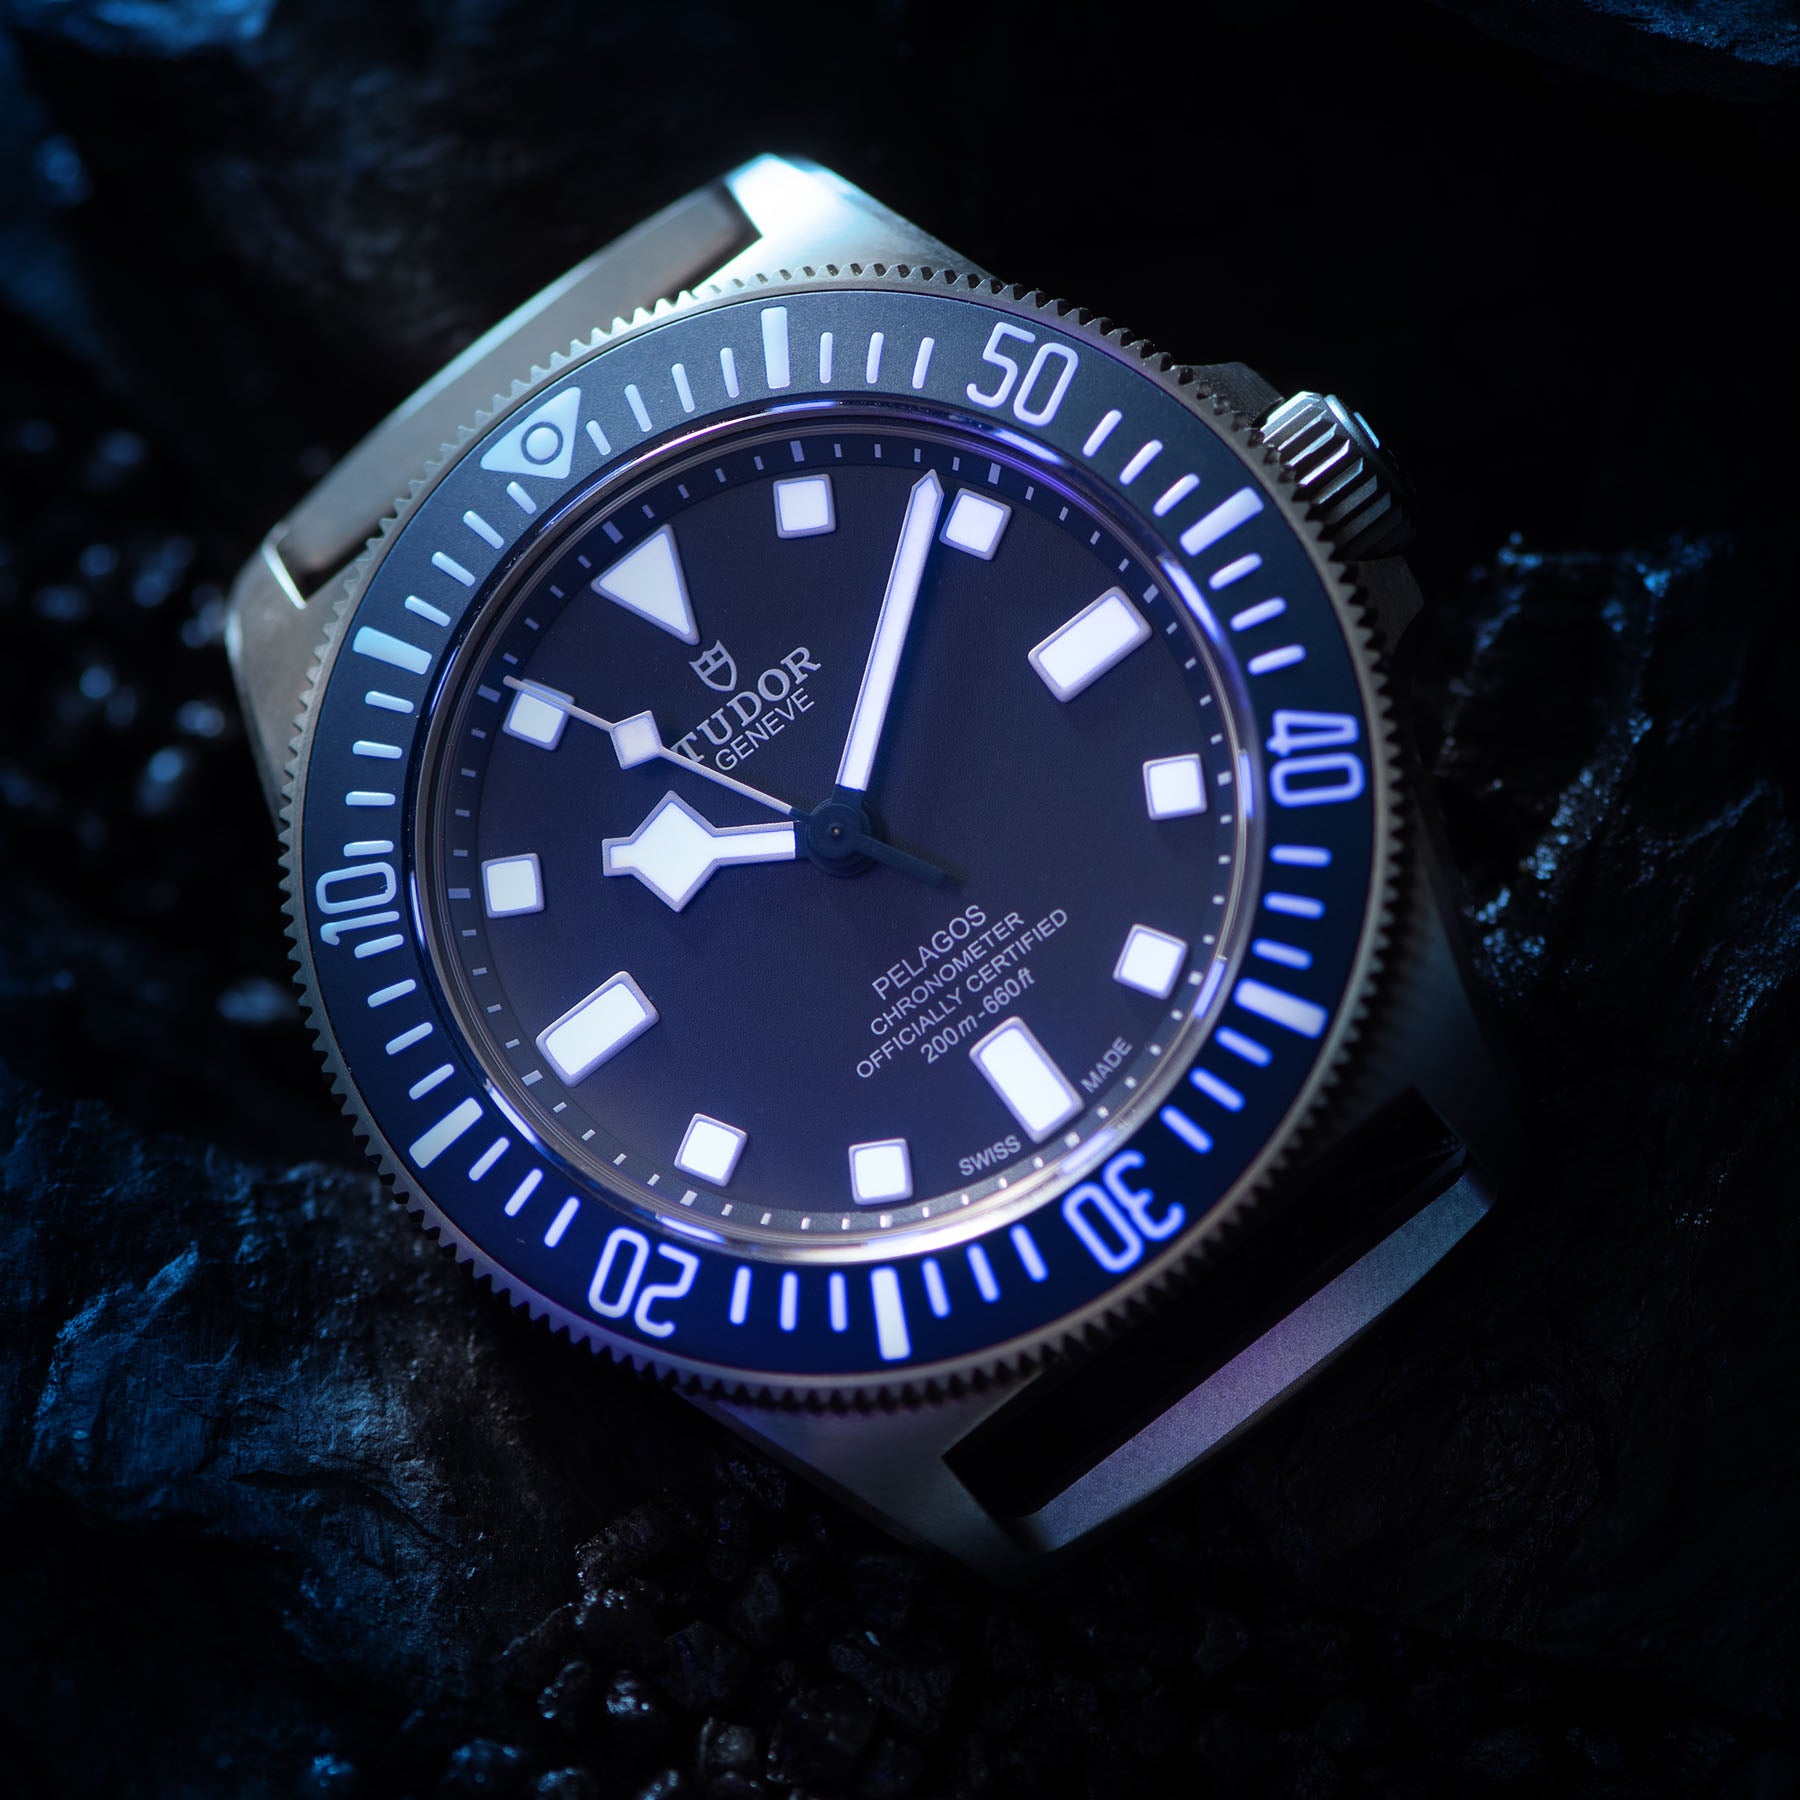 Tudor Pelagos FXD MN21 Box and Papers